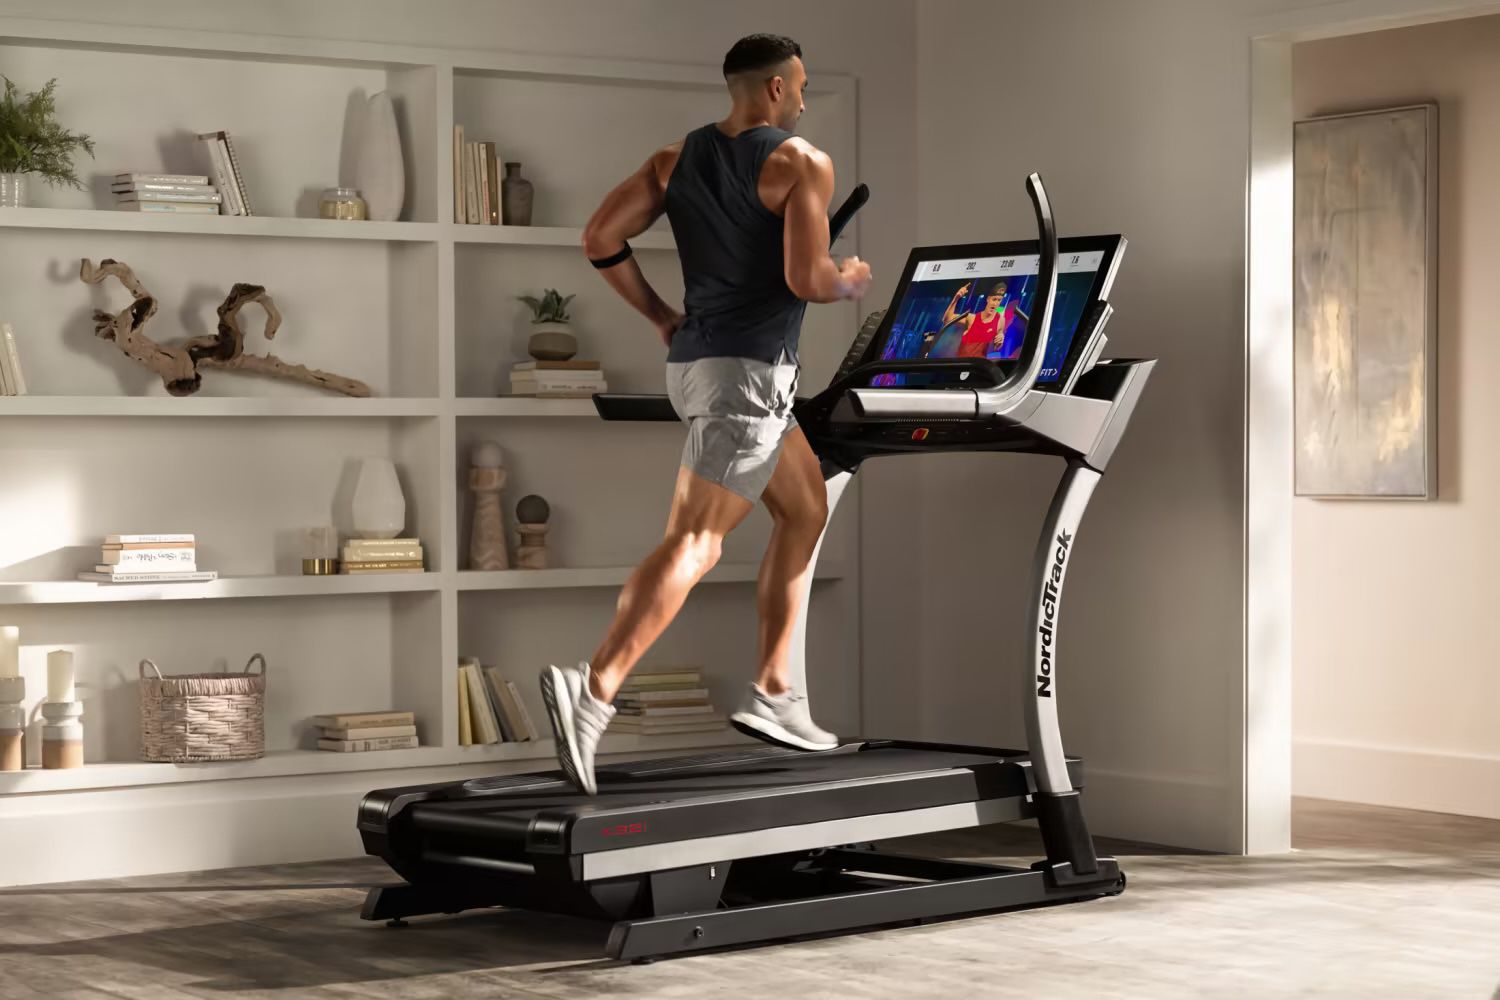 NORDICTRACK COMMERCIAL X32, 40% INCLINE, 32” TOUCHSCREEN, BRAND NEW IN BOX  = FREE DELIVERY AND SET UP 